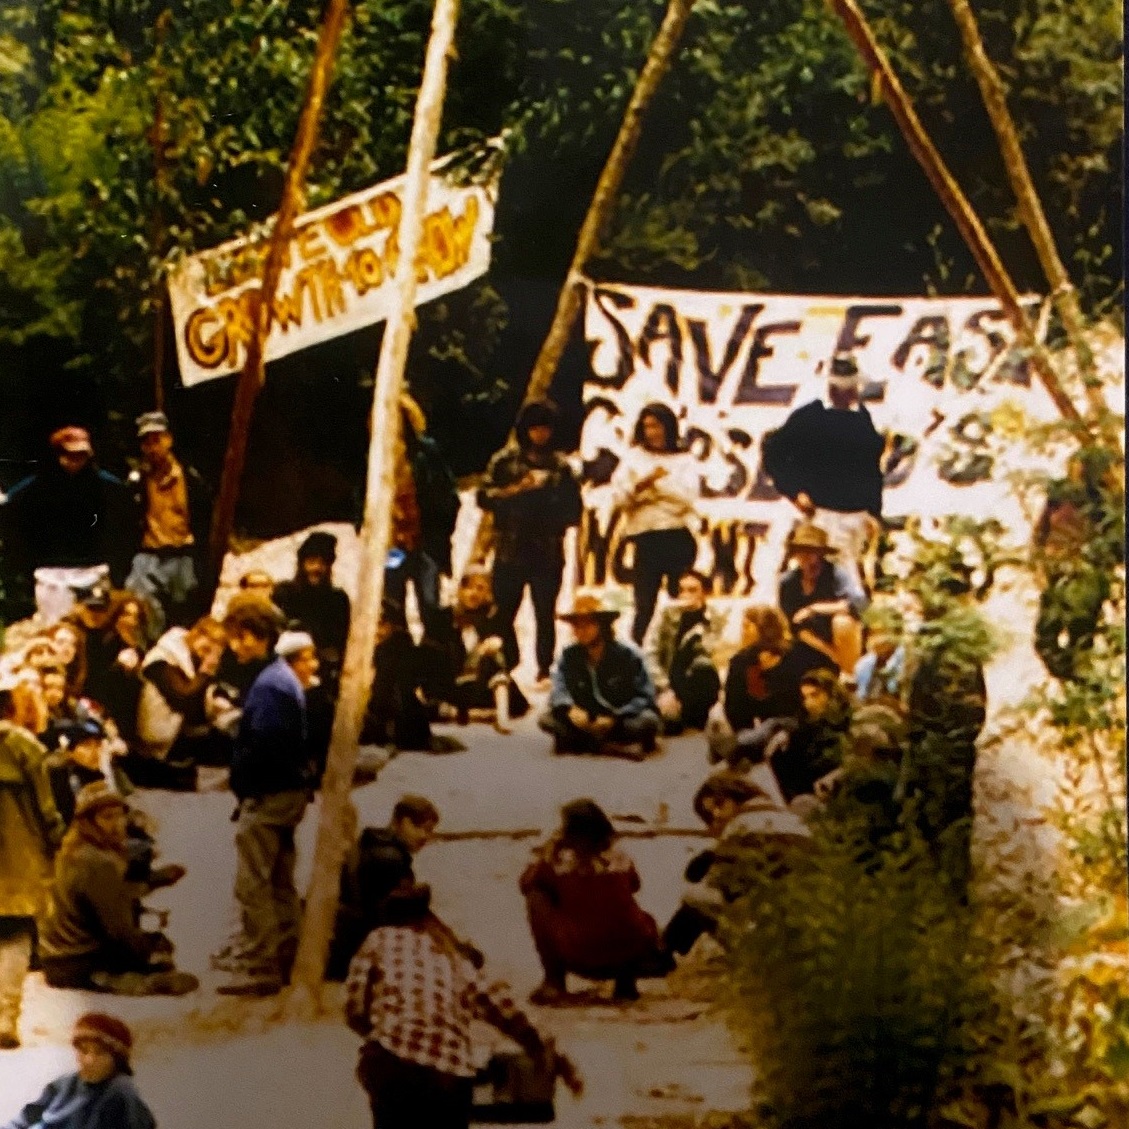 A group of protesters blocking a road in a forest with a wooden structure.